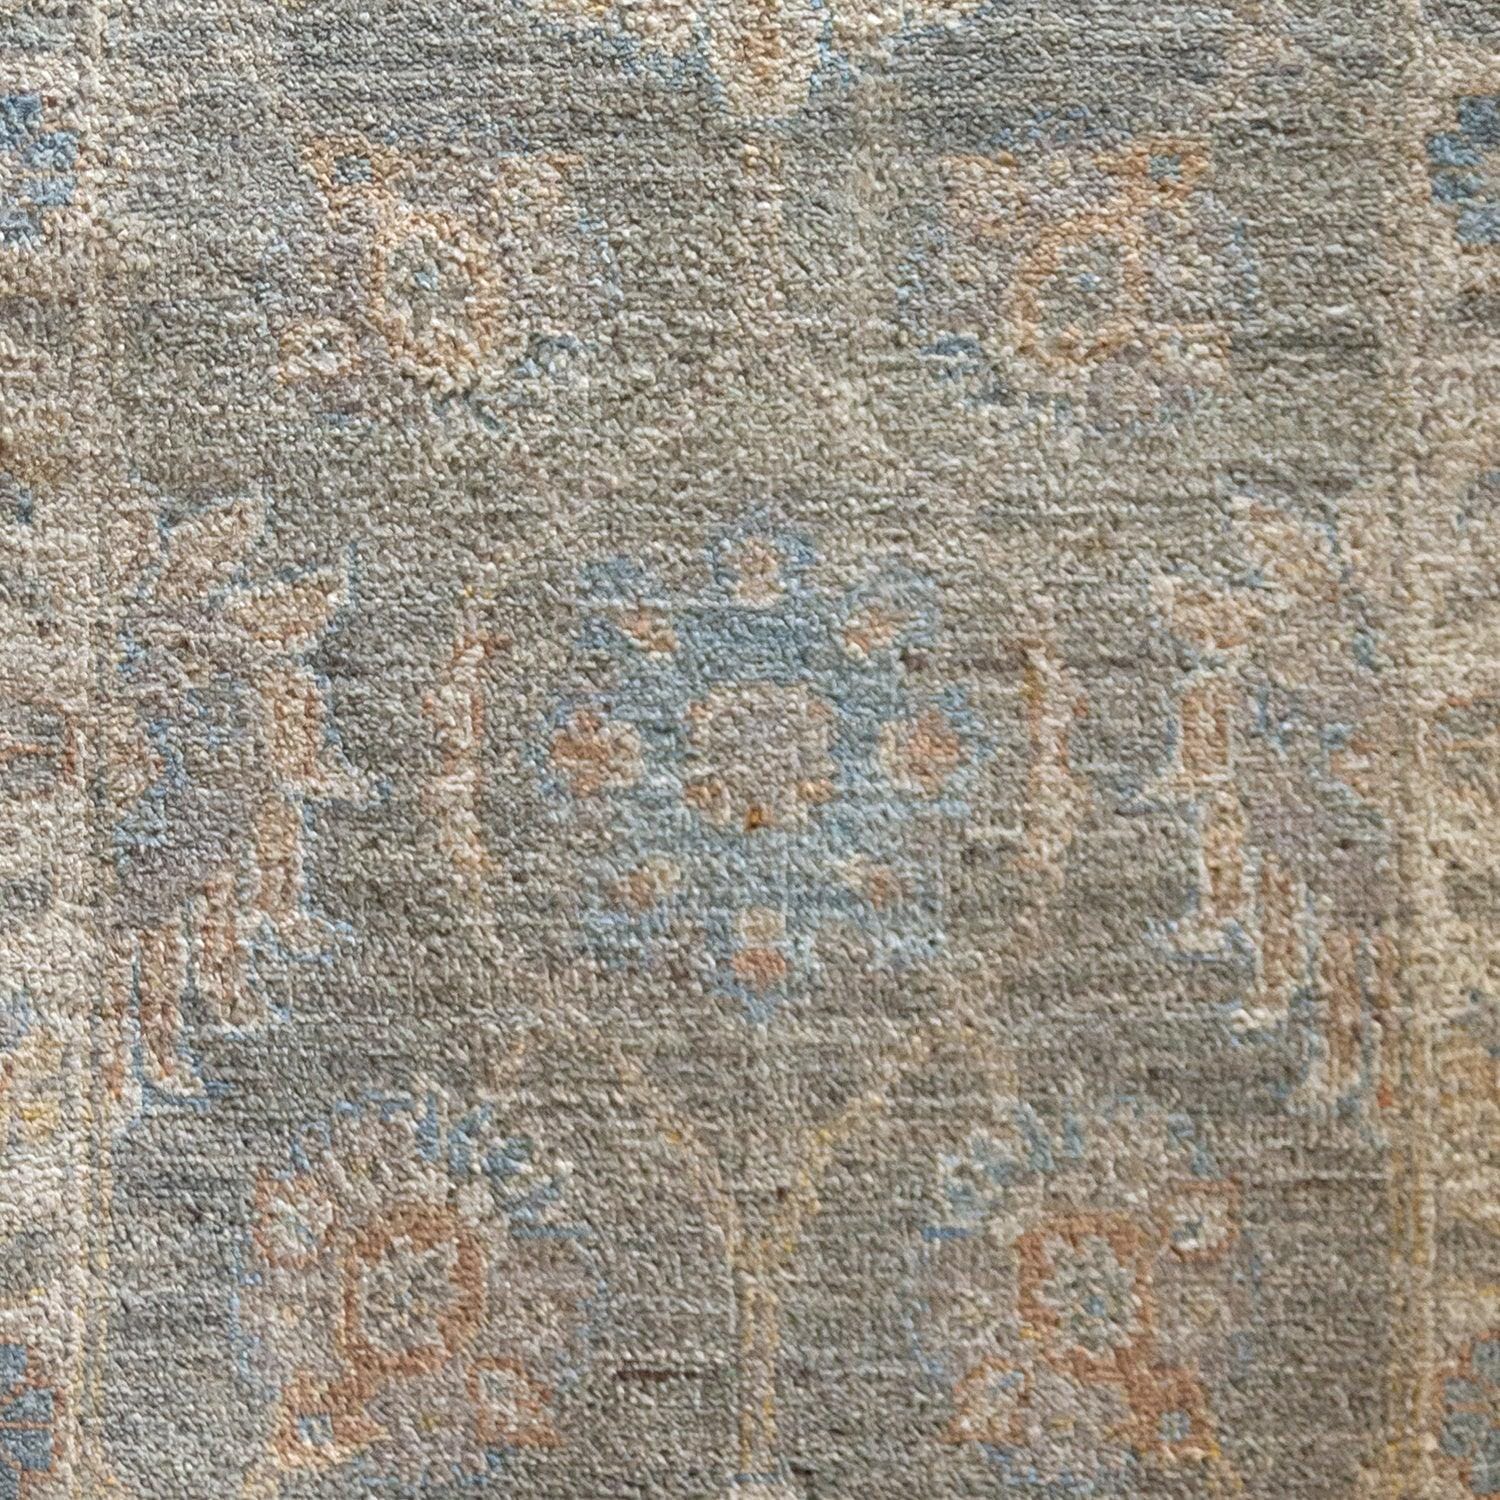 Hand-knotted Muted Blue Rug Small 60cm x 88cm